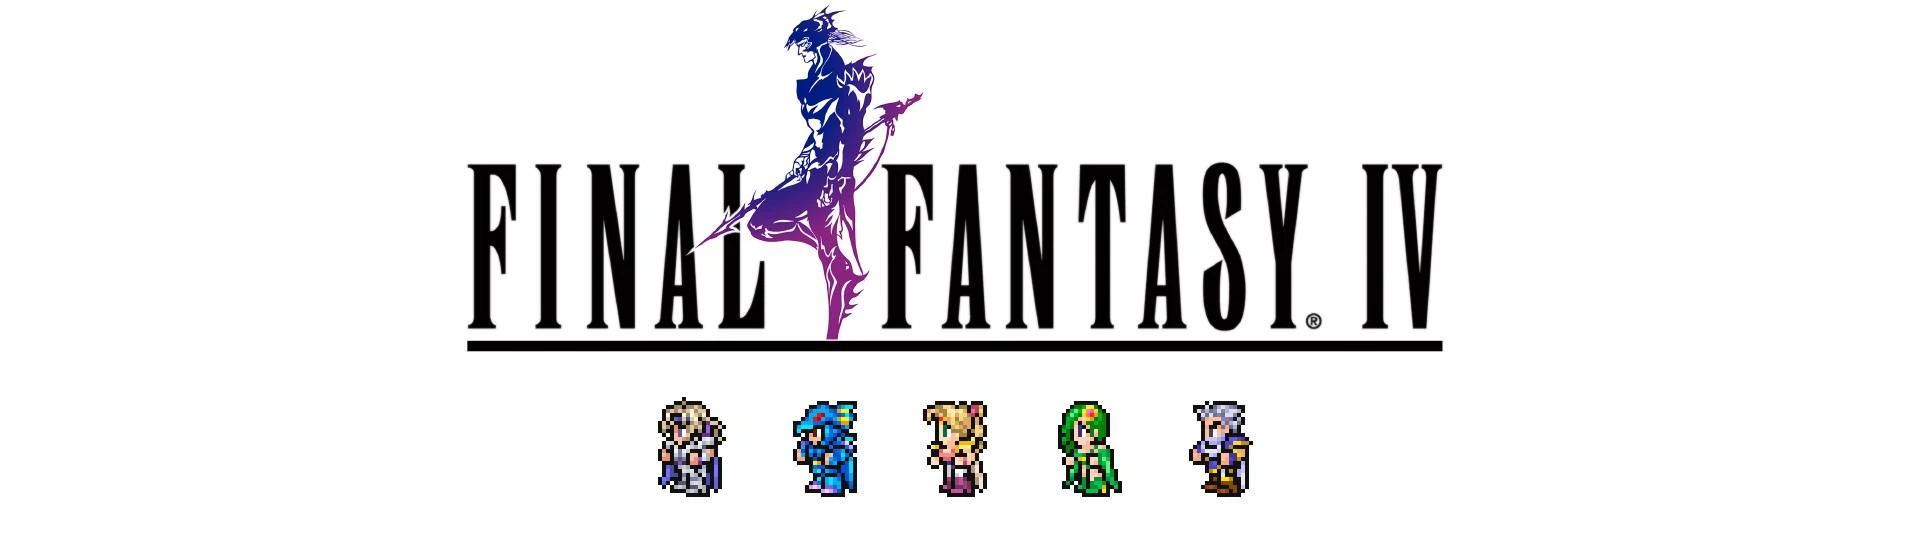 Final Fantasy Record Keeper Current Thoughts and